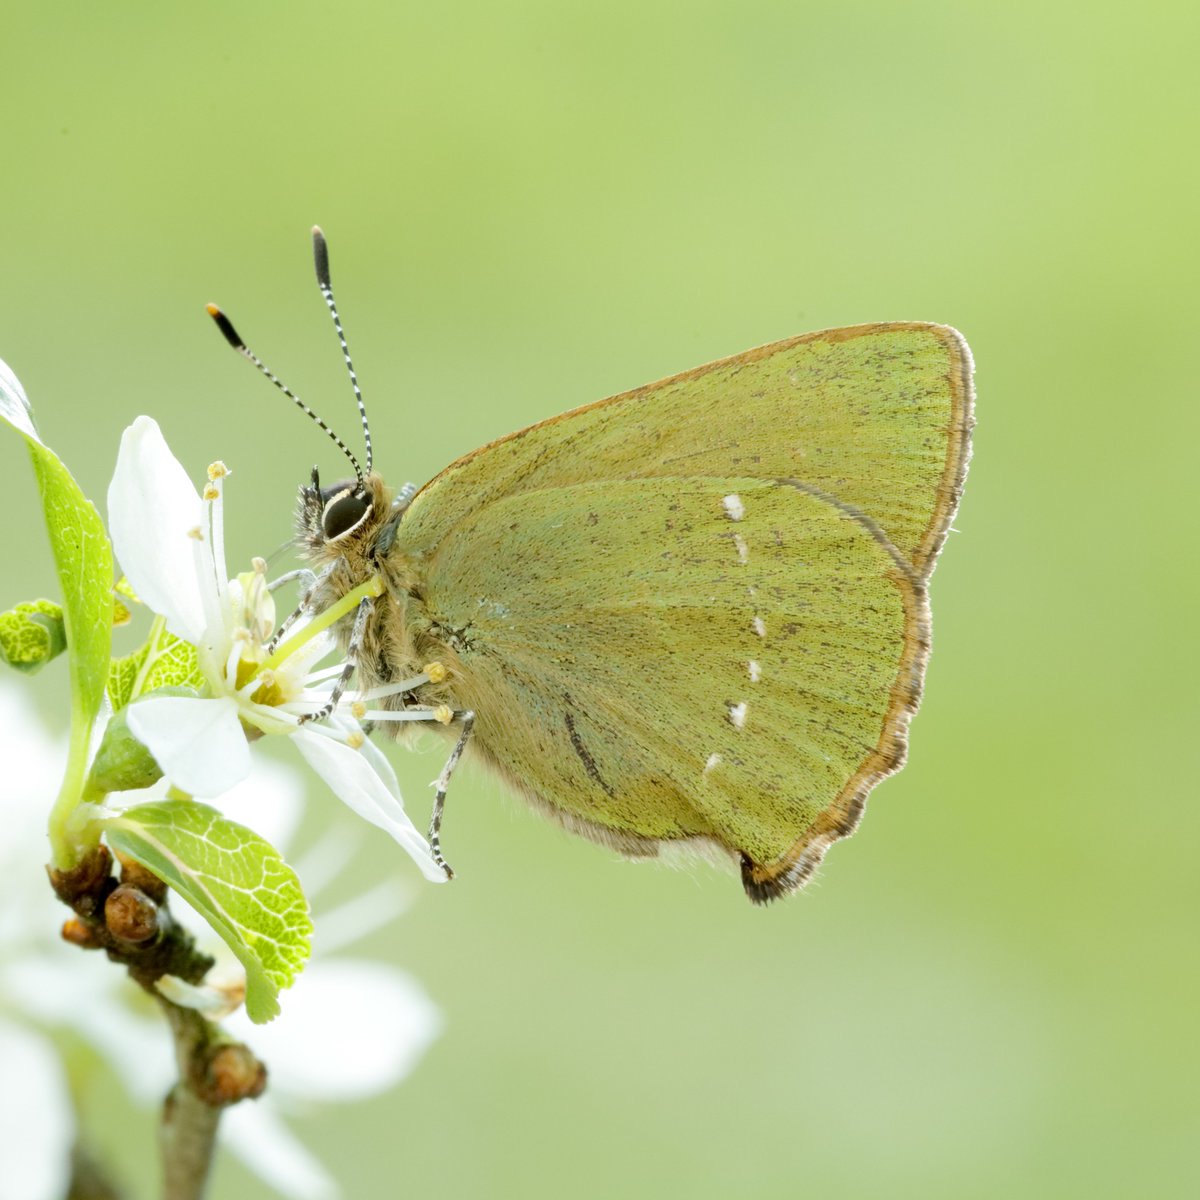 Guided butterfly walk this Sunday, May 12th at @NNorthantsC's Fermyn Woods Country Park from 10am-2pm! Meet at the Skylark Café. #SpeciesRecoveryProgramme targets Dingy & Grizzled Skipper + others on the wing! 🦋✨ More info: butterfly-conservation.org/events/fermyn-… @BedsNthantsBC